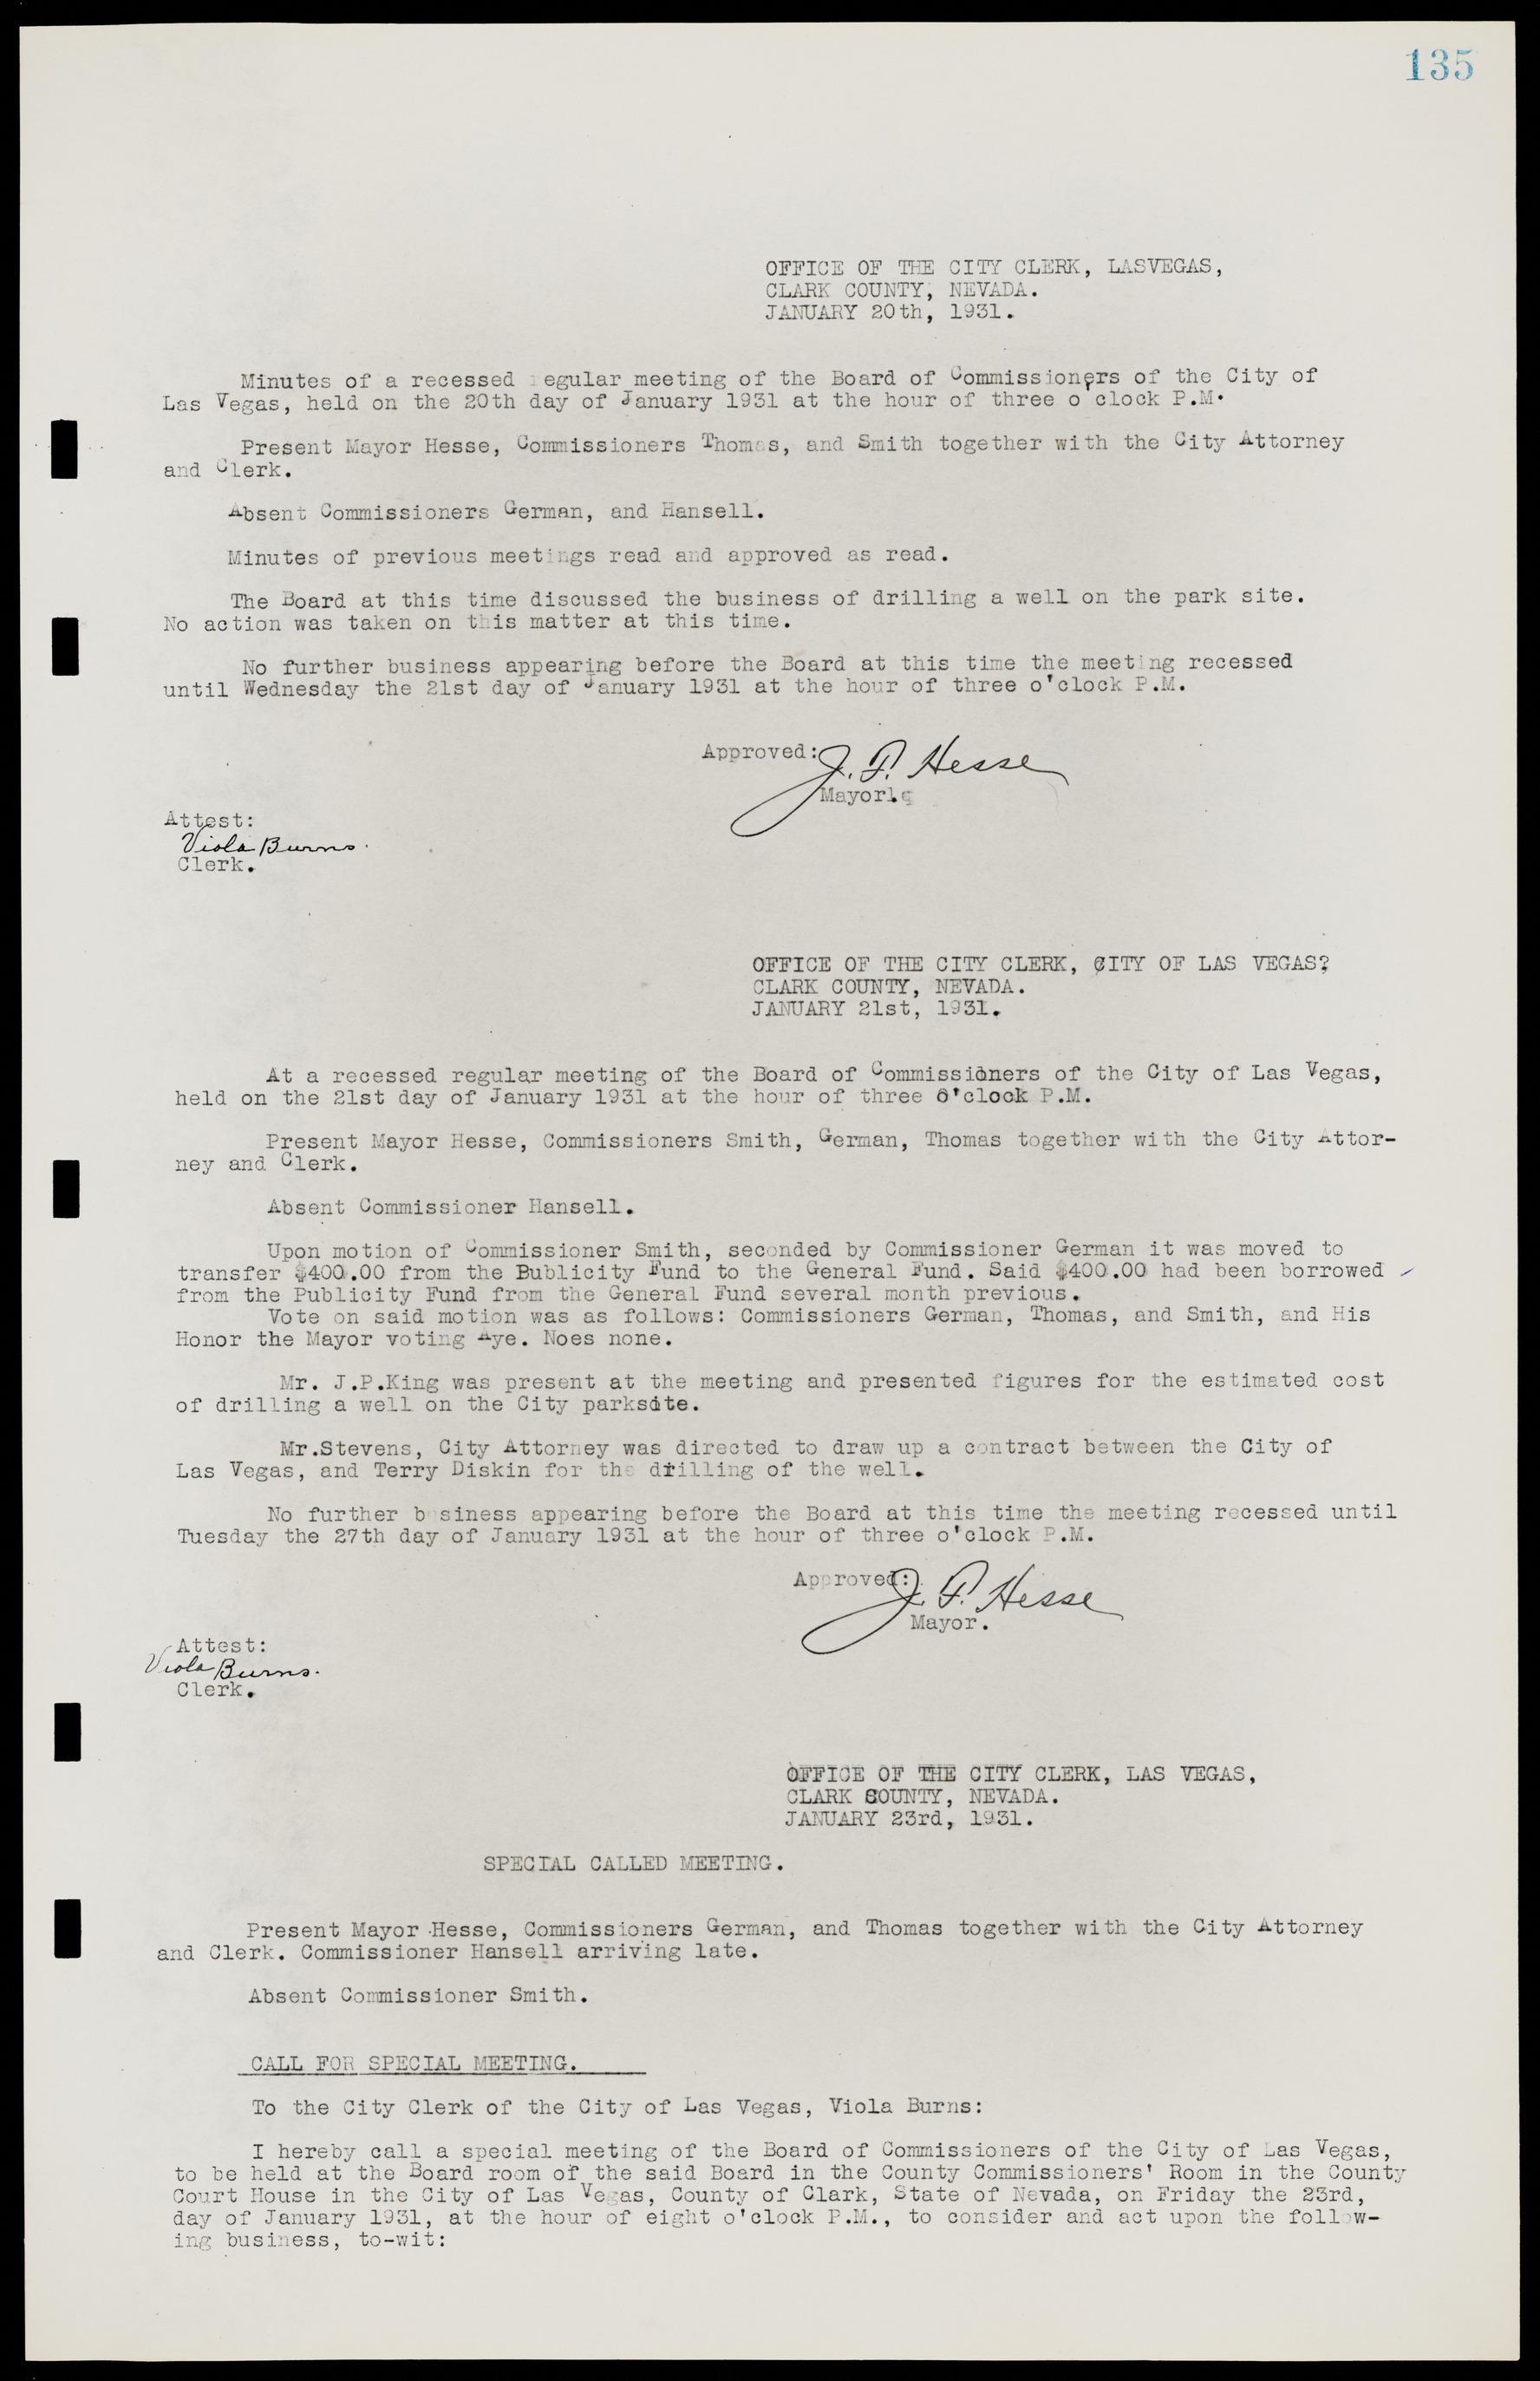 Las Vegas City Commission Minutes, May 14, 1929 to February 11, 1937, lvc000003-141